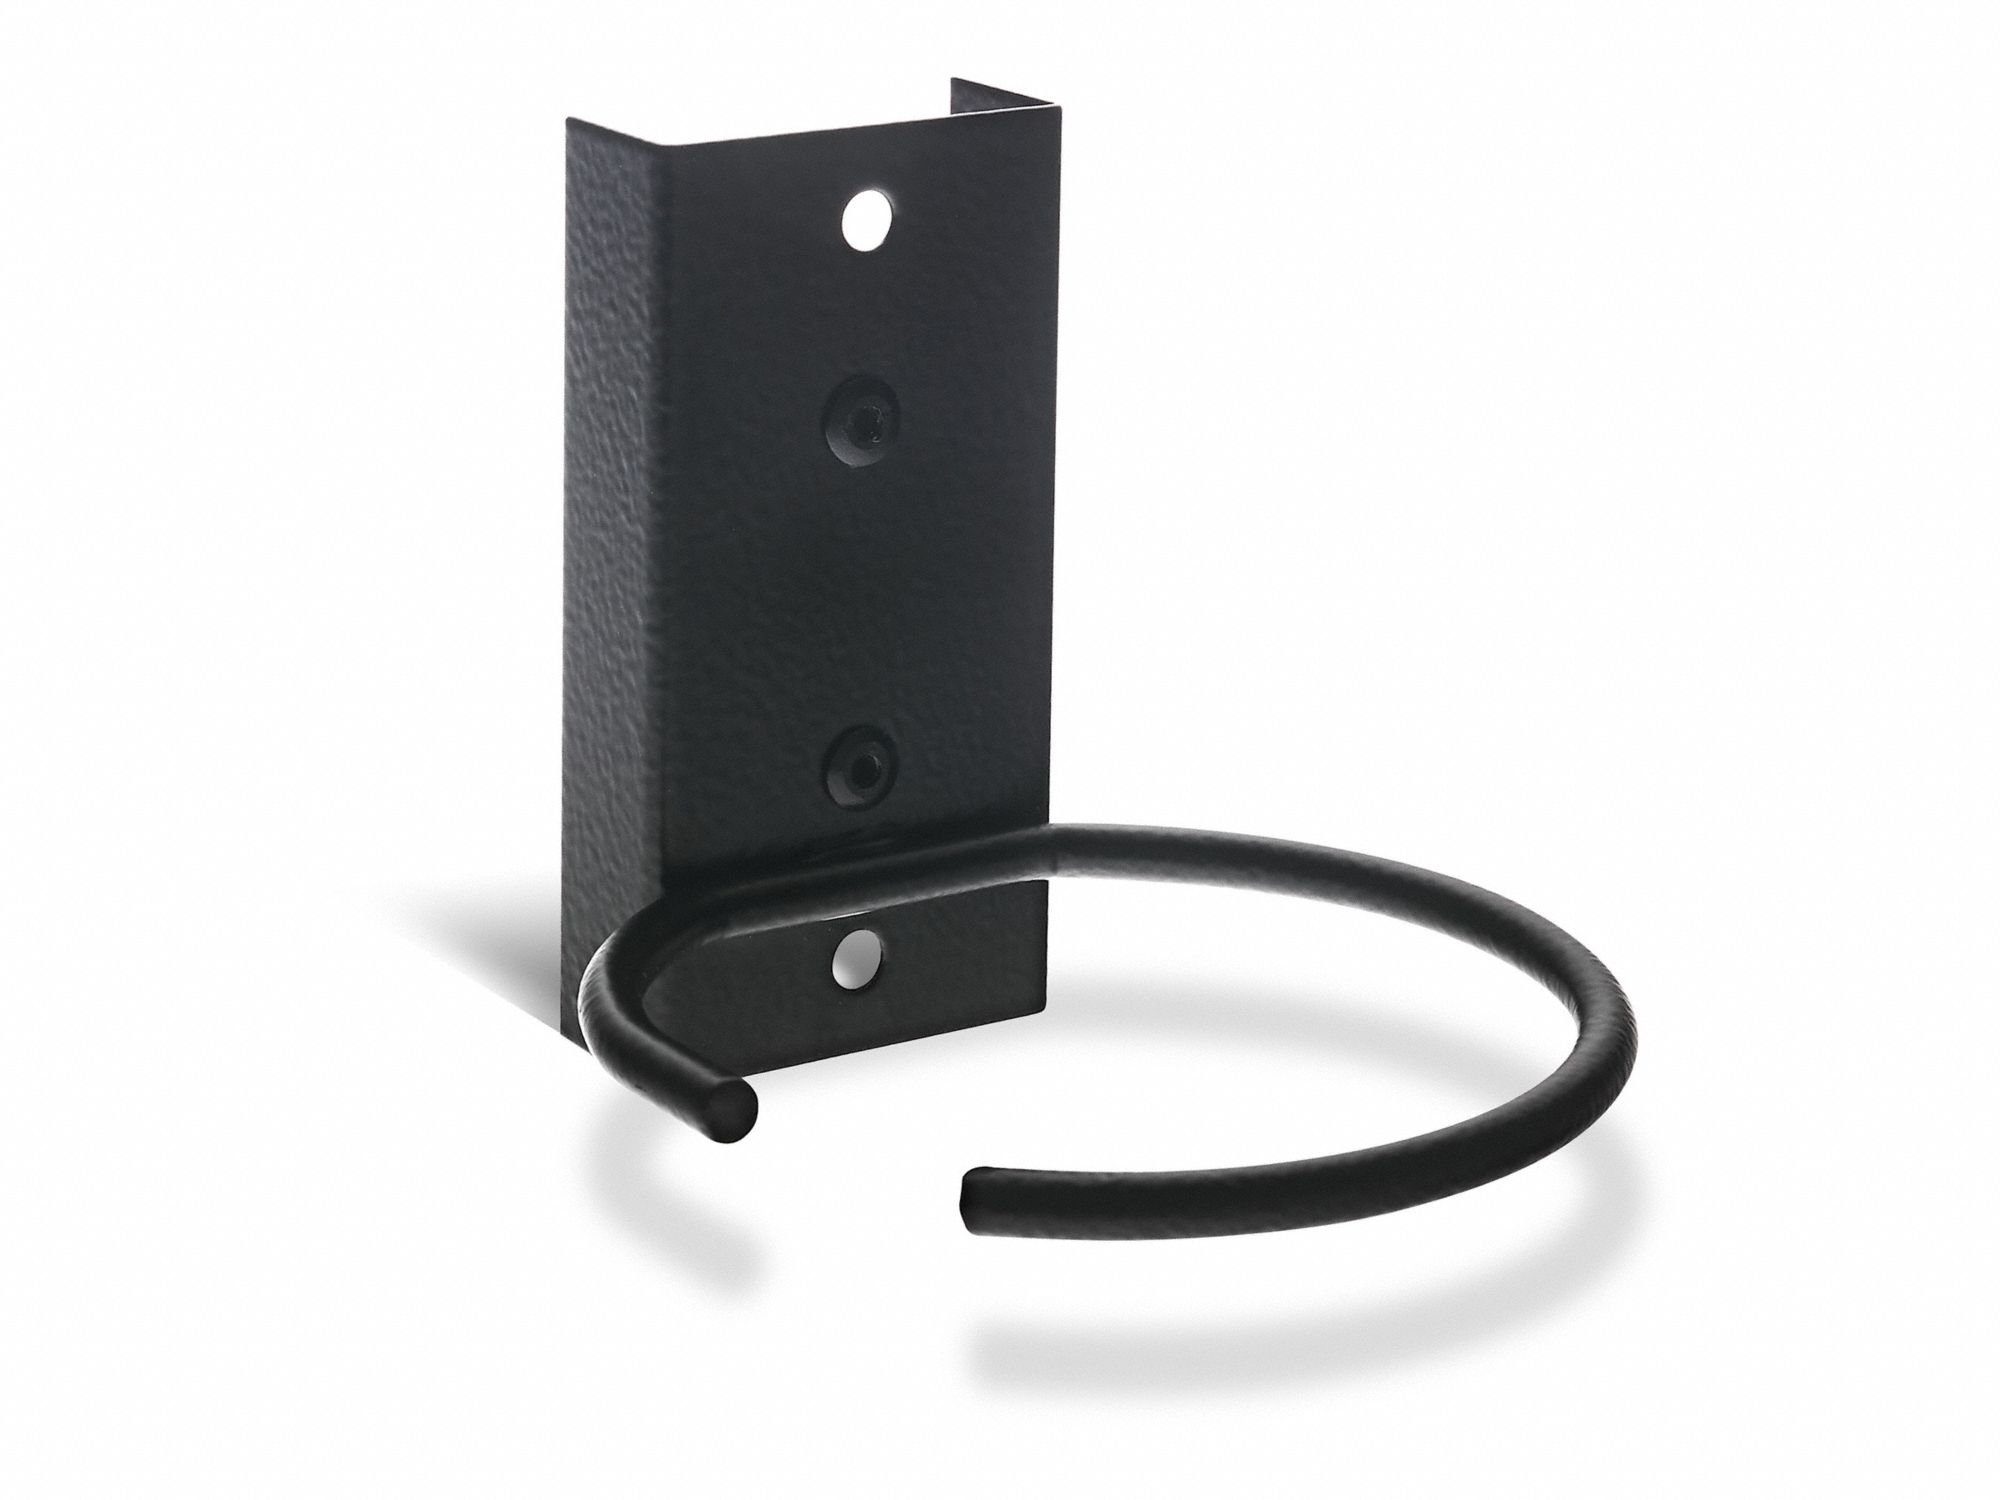 Single Ring Tool Holder: Black, Steel, 5S/Lean Manufacturing Requirements, 4 in Overall Lg